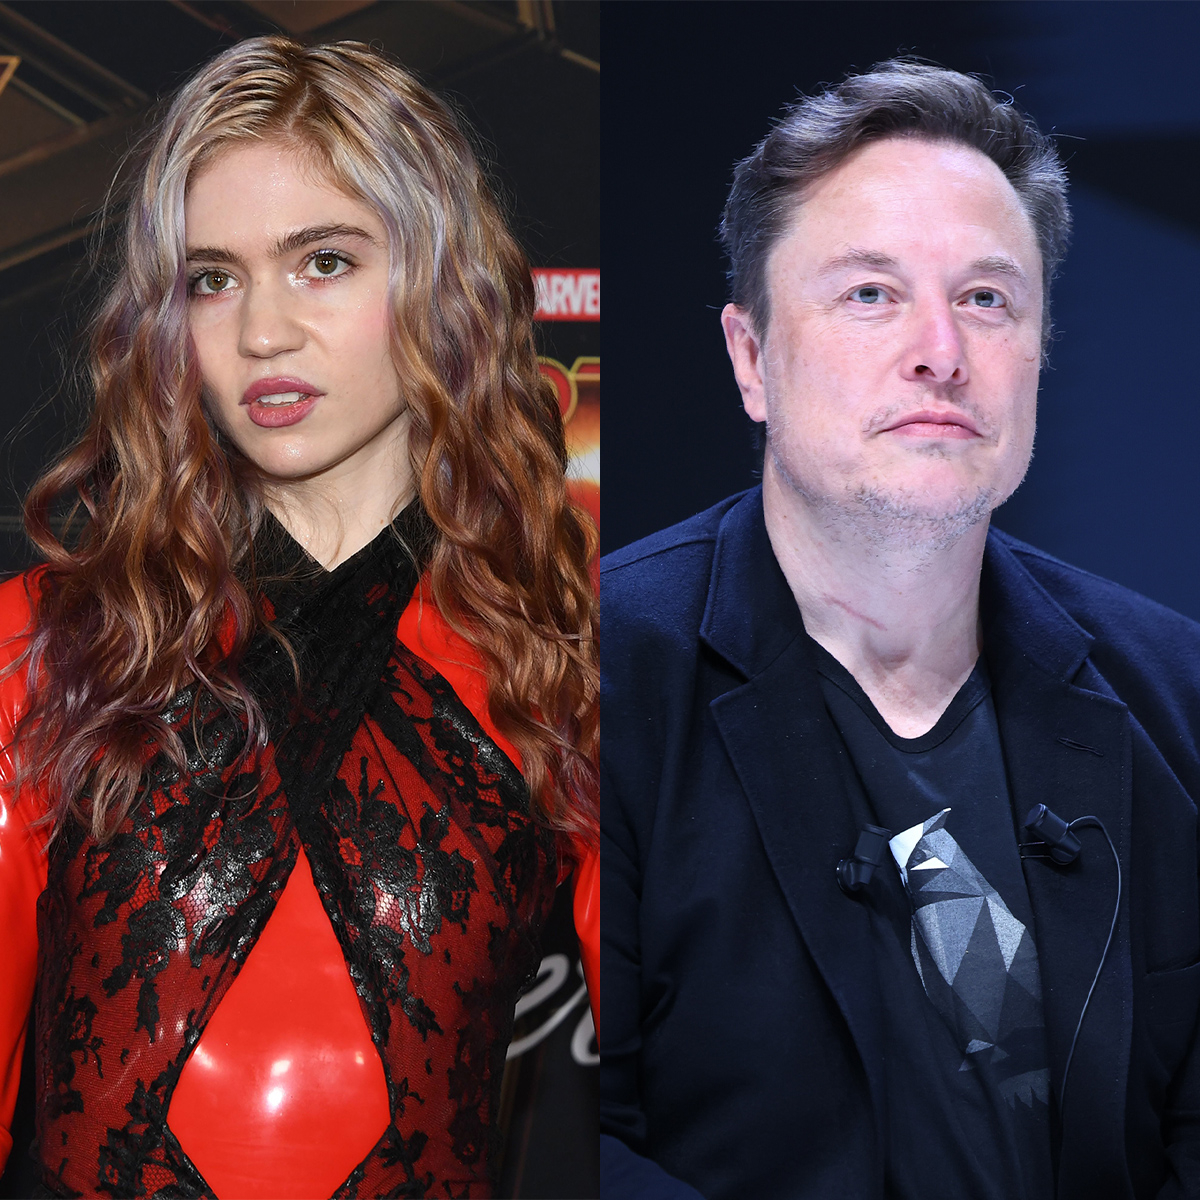 Grimes’ Mom Accuses Elon Musk of “Withholding” 3 Kids From Family Trip